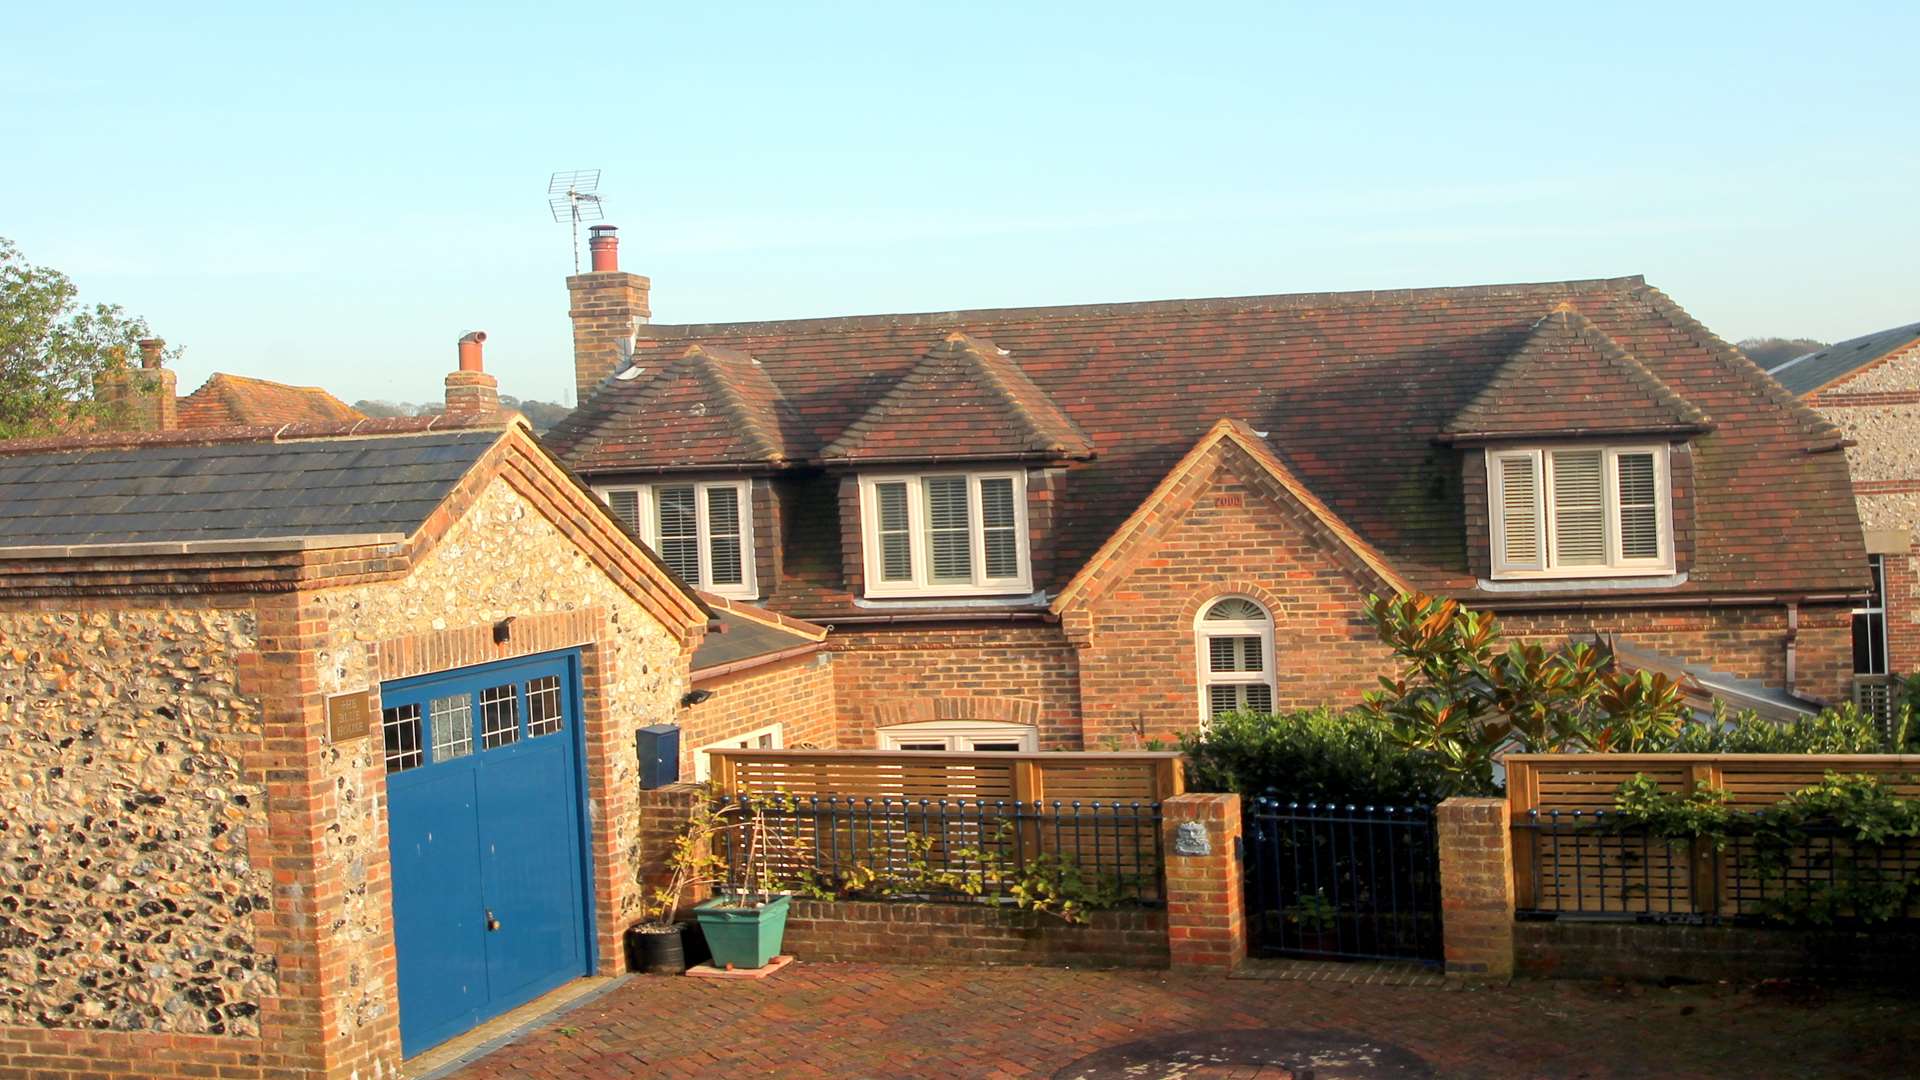 The property at The Row, Elham, near Canterbury